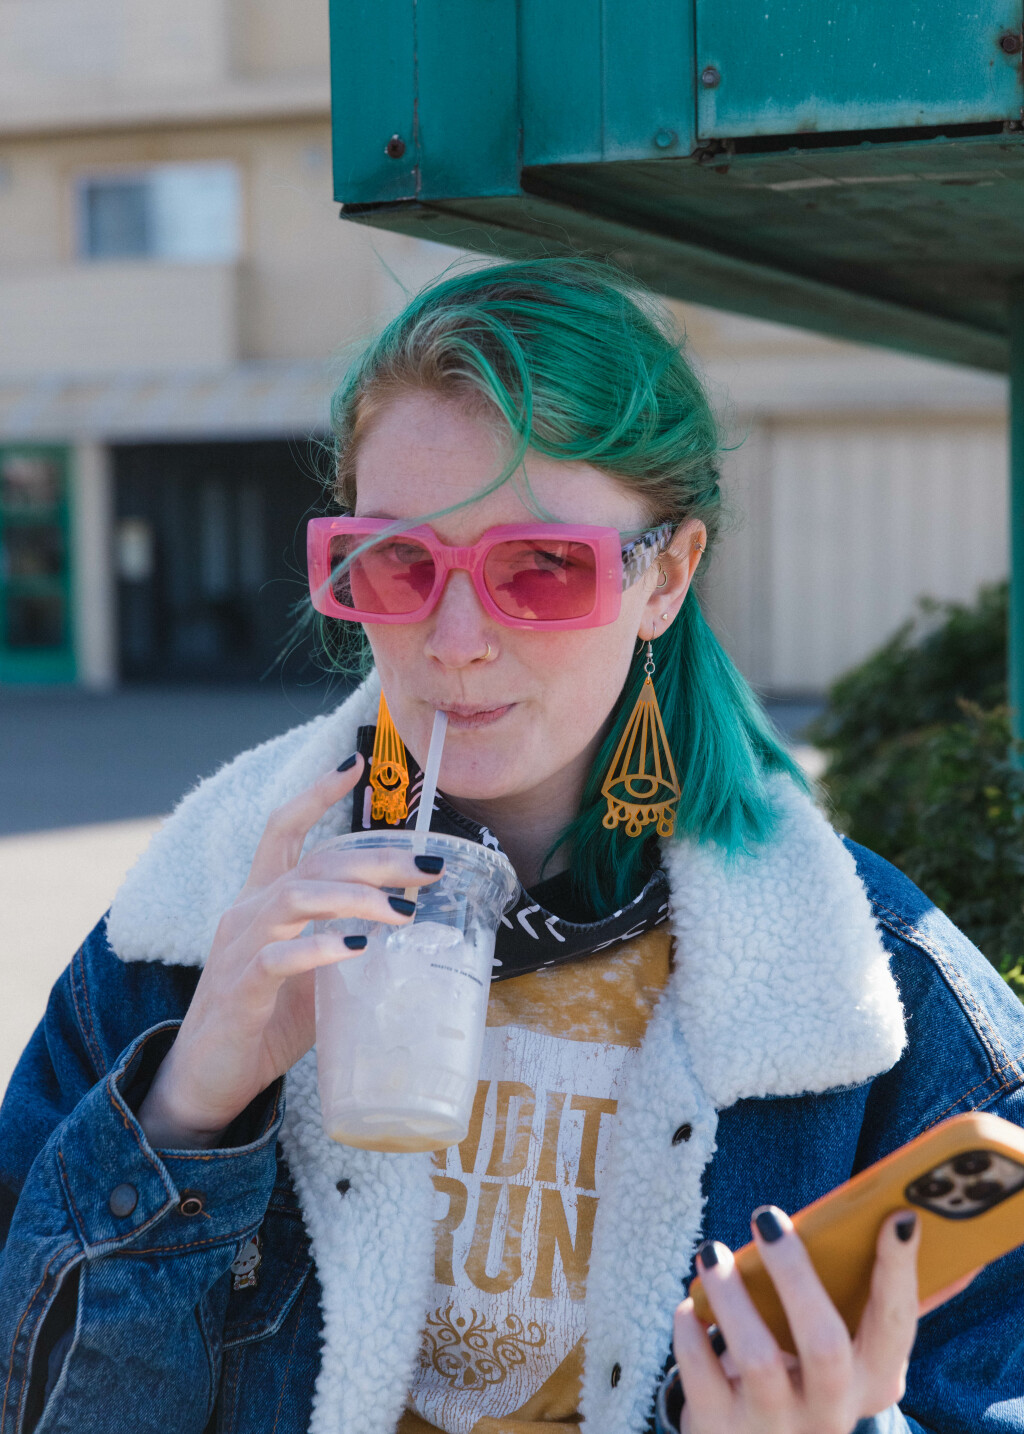 Beth's drinking an iced oat chai, wearing a yellow shirt, yellow earrings, and holding a yellow phone case